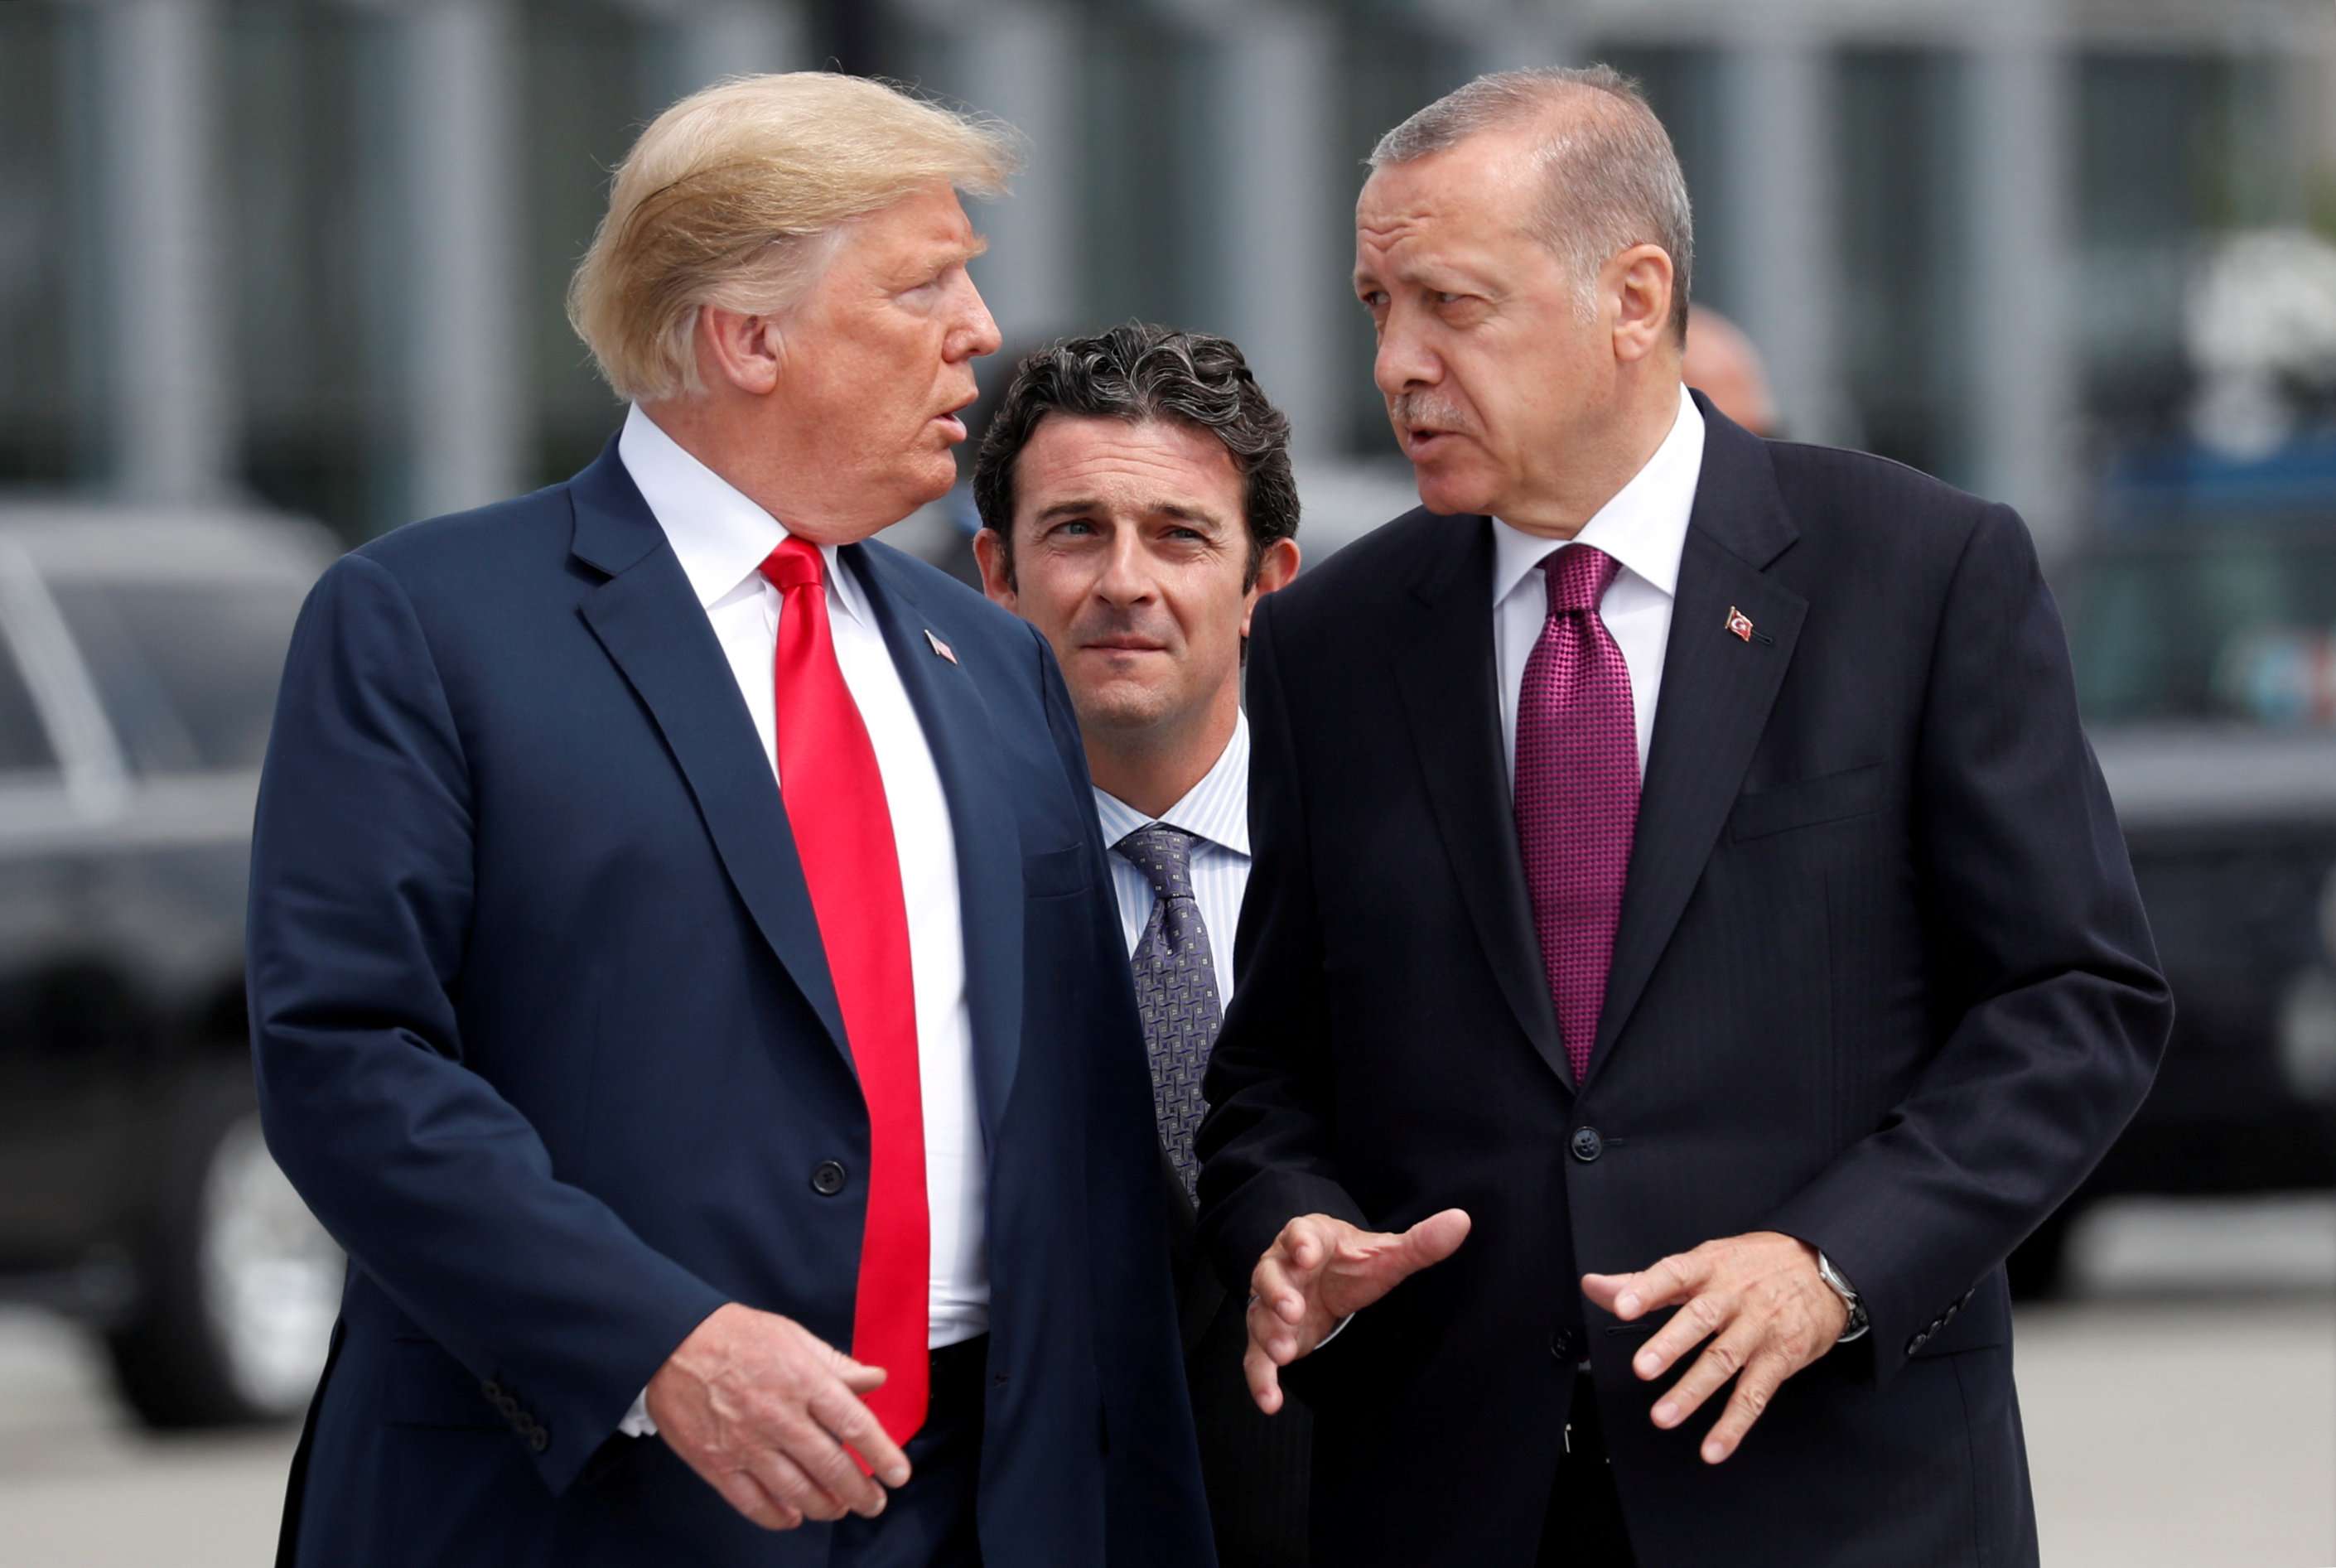 The billionaire US leader says he has a close relationship with Turkey's president Recep Tayyip Erdogan